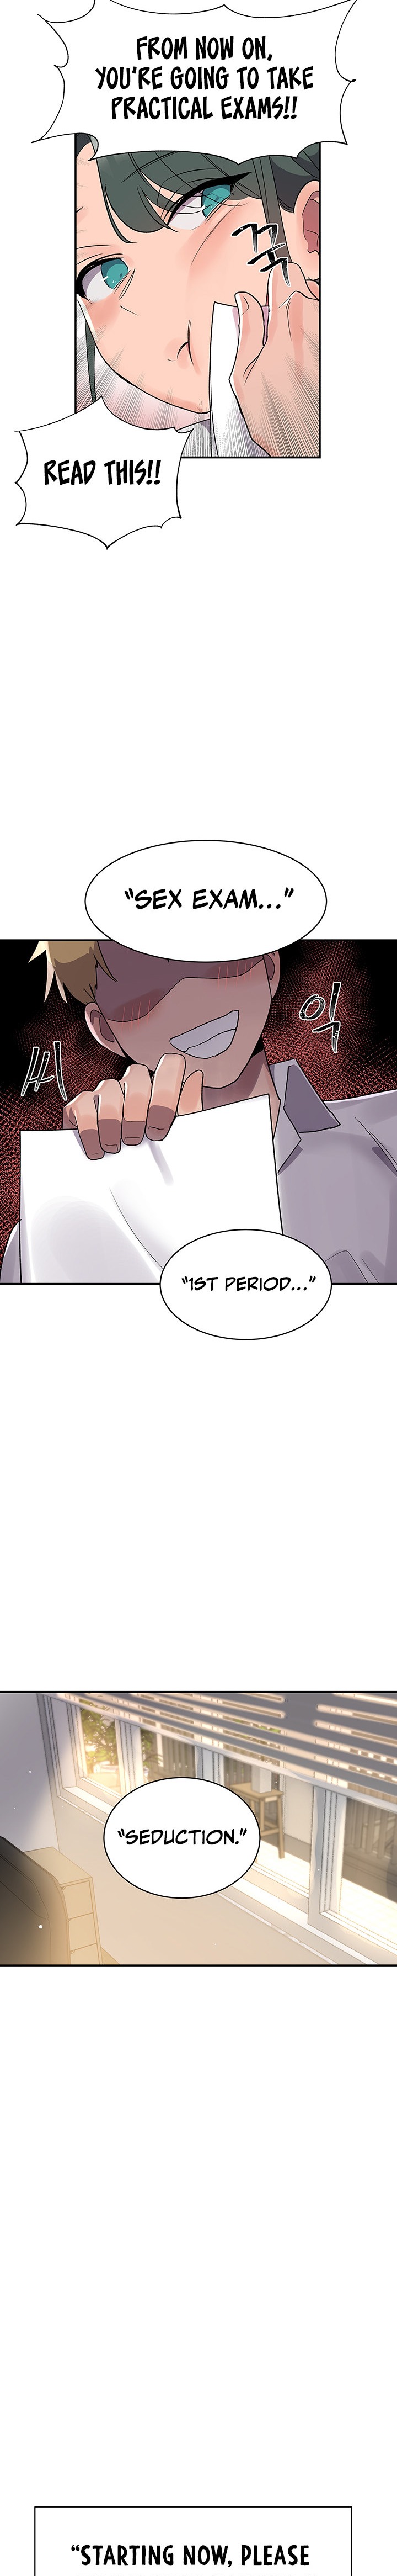 Relationship Reverse Button: Let’s Educate That Arrogant Girl - Chapter 5 Page 11